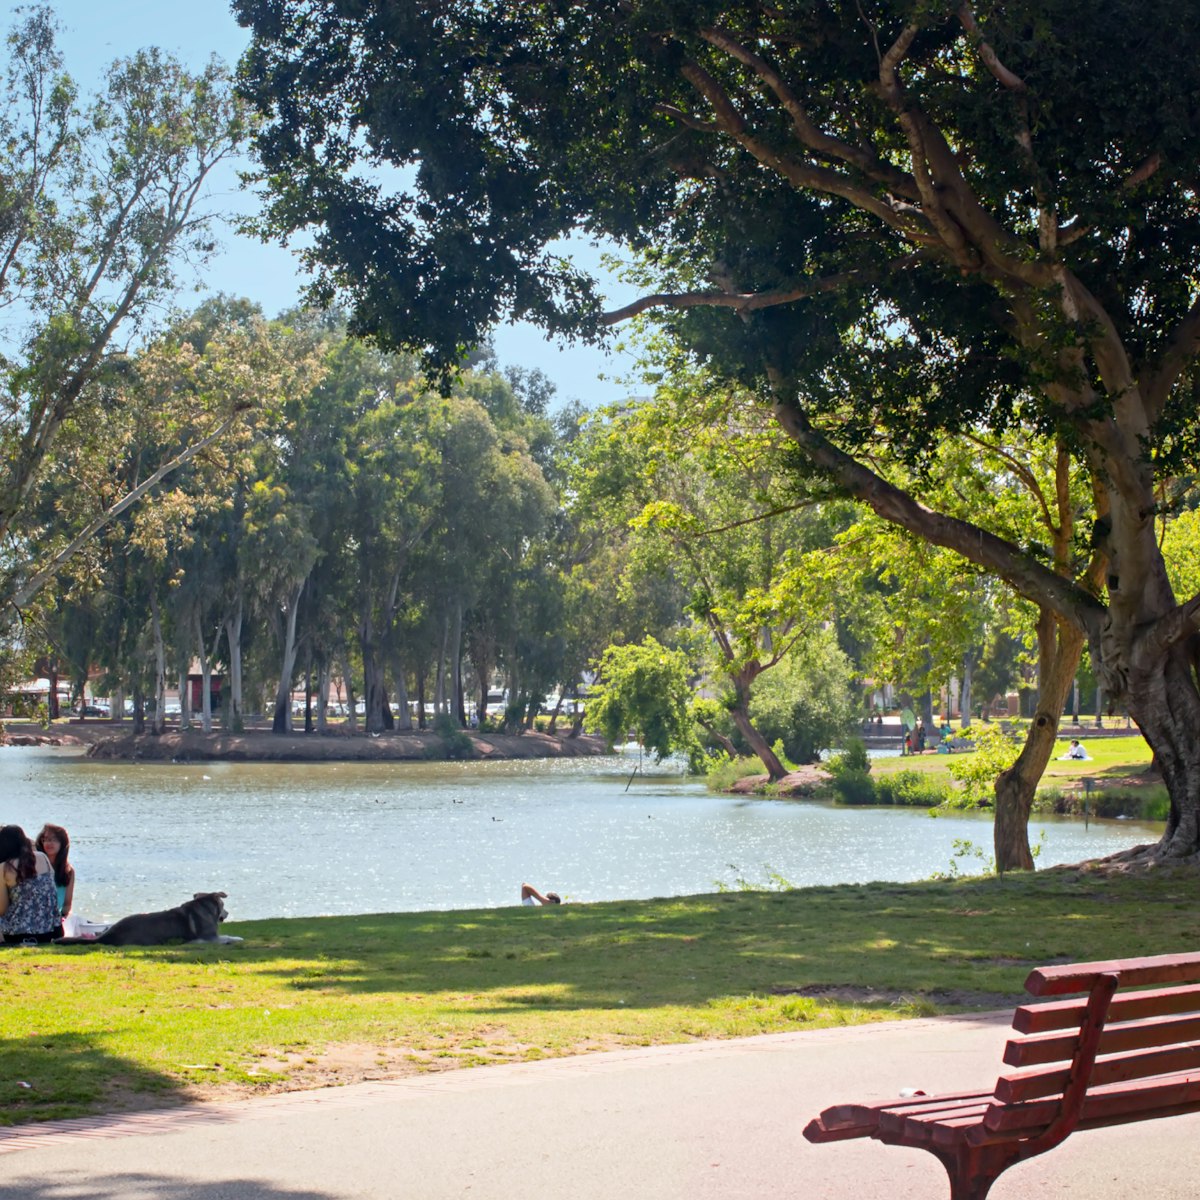 TEL AVIV, ISRAEL - May 6 2016: Lake, bench, girls with dog, and relax in Yarkon Park; Shutterstock ID 698891233; Your name (First / Last): Lauren Keith; GL account no.: 65050; Netsuite department name: Online Editorial; Full Product or Project name including edition: Tel Aviv Online Update